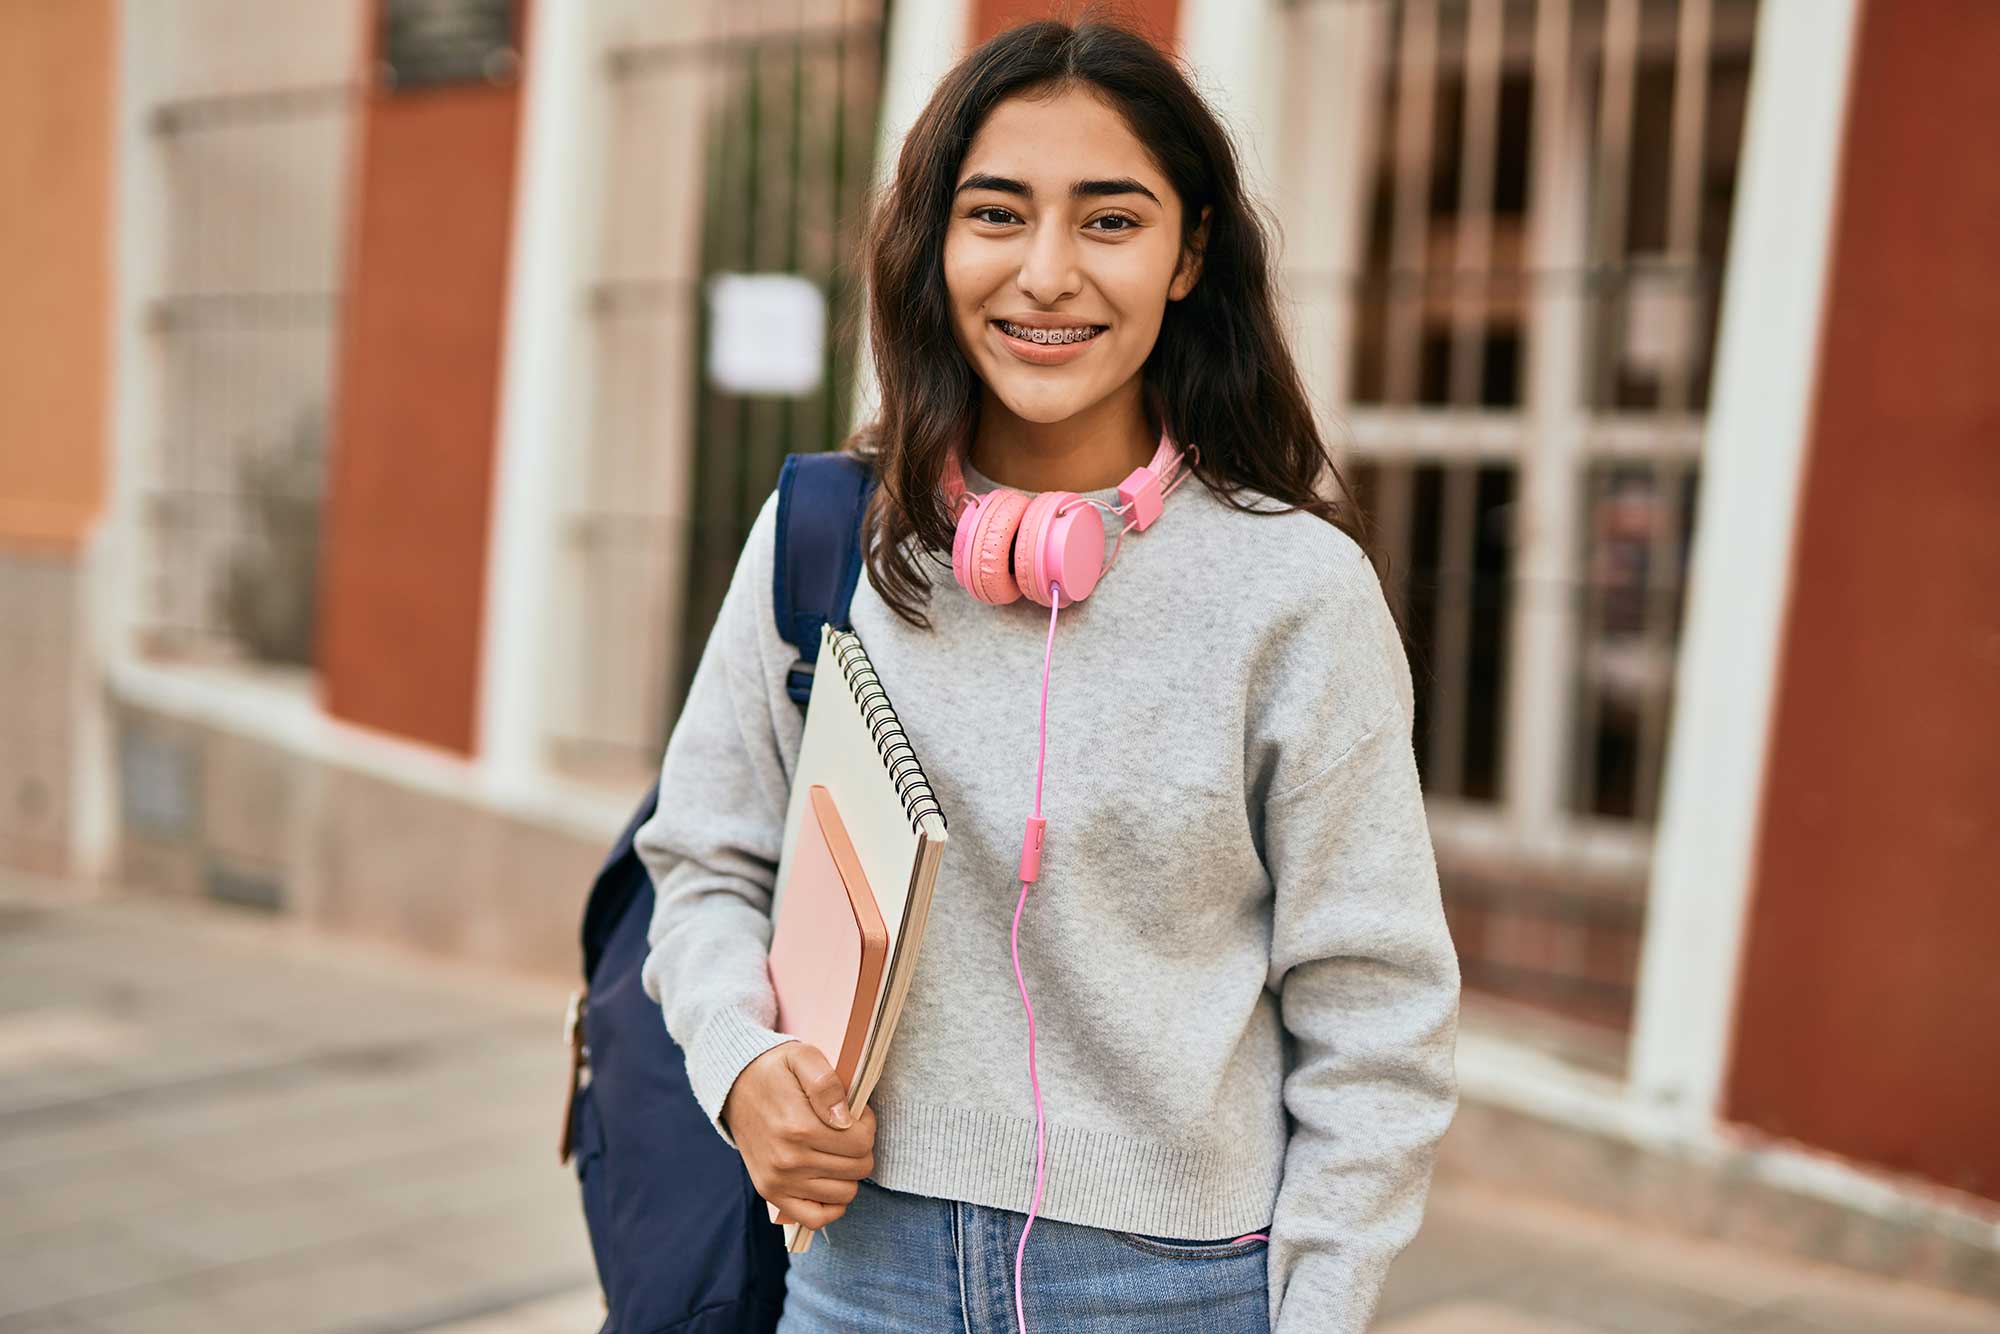 Smiling teenager with pink headphones around their neck, a backpack on their shoulder and notebooks in their hand.